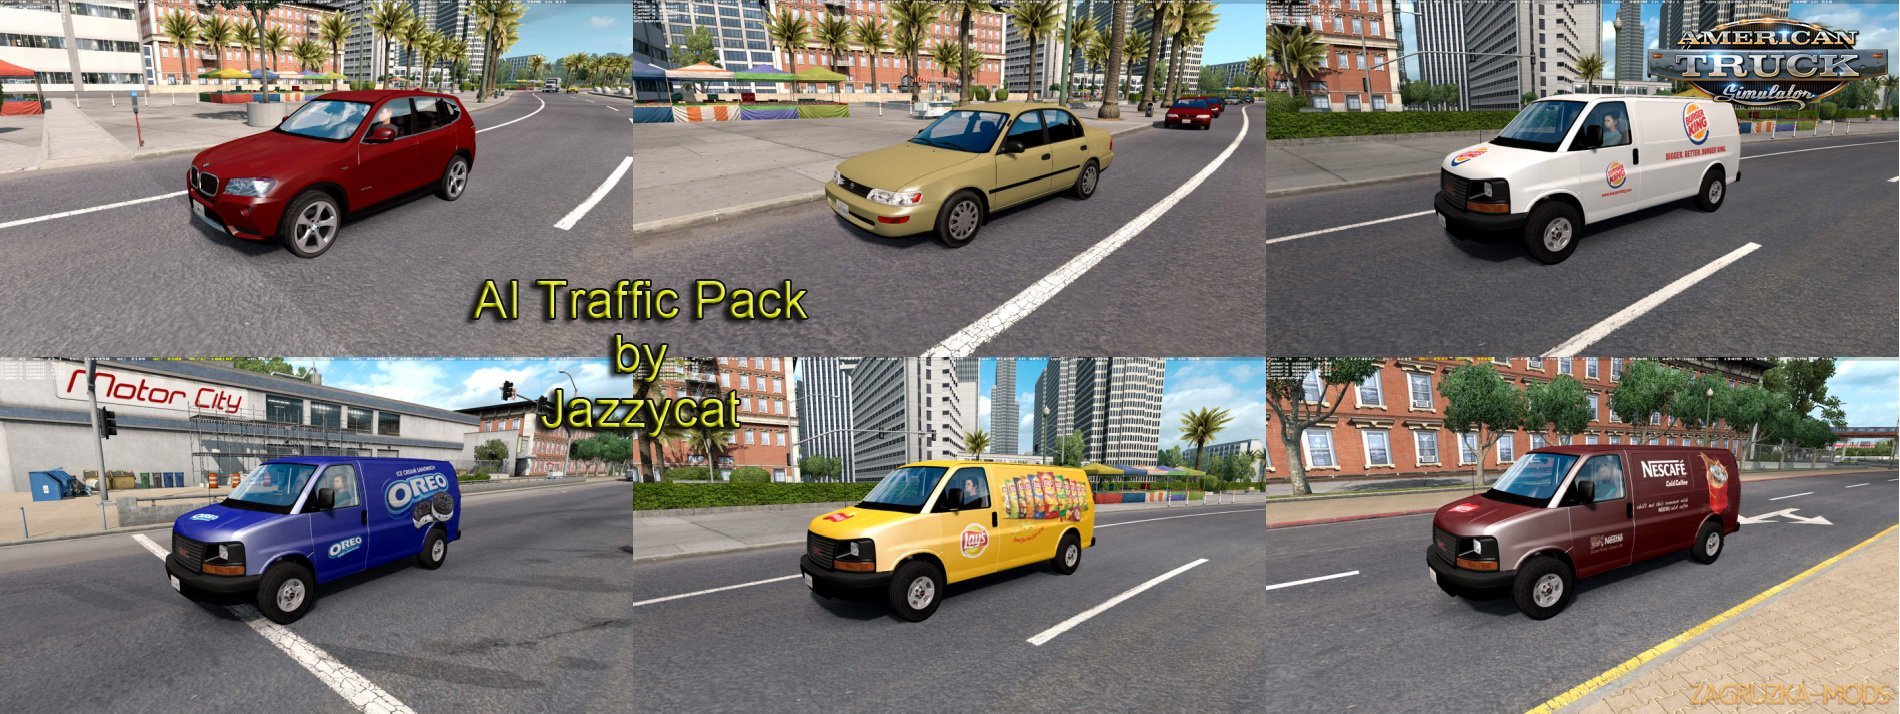 AI Traffic Pack v3.8 by Jazzycat